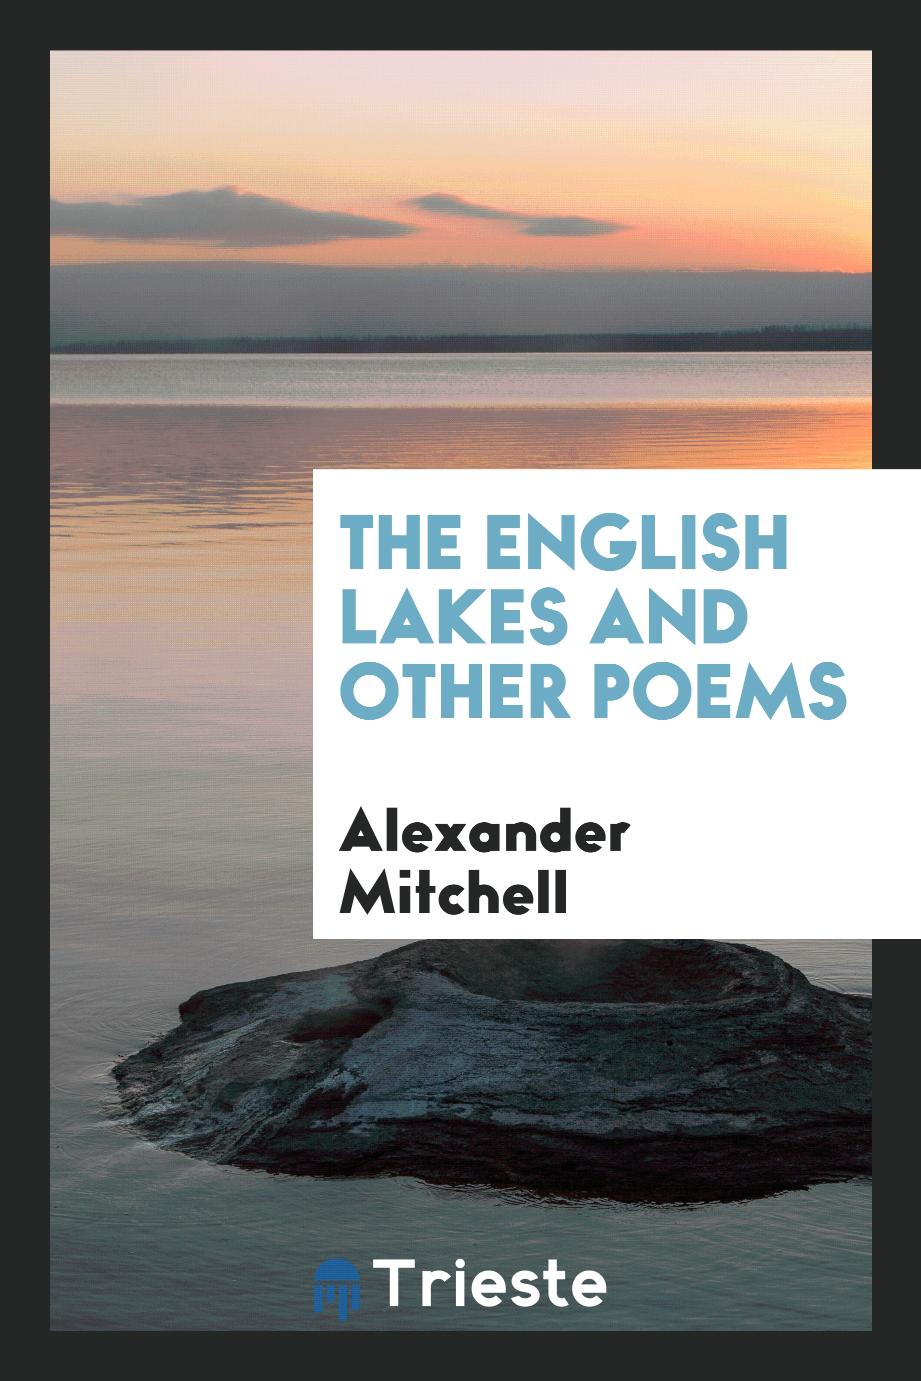 The English Lakes and Other Poems